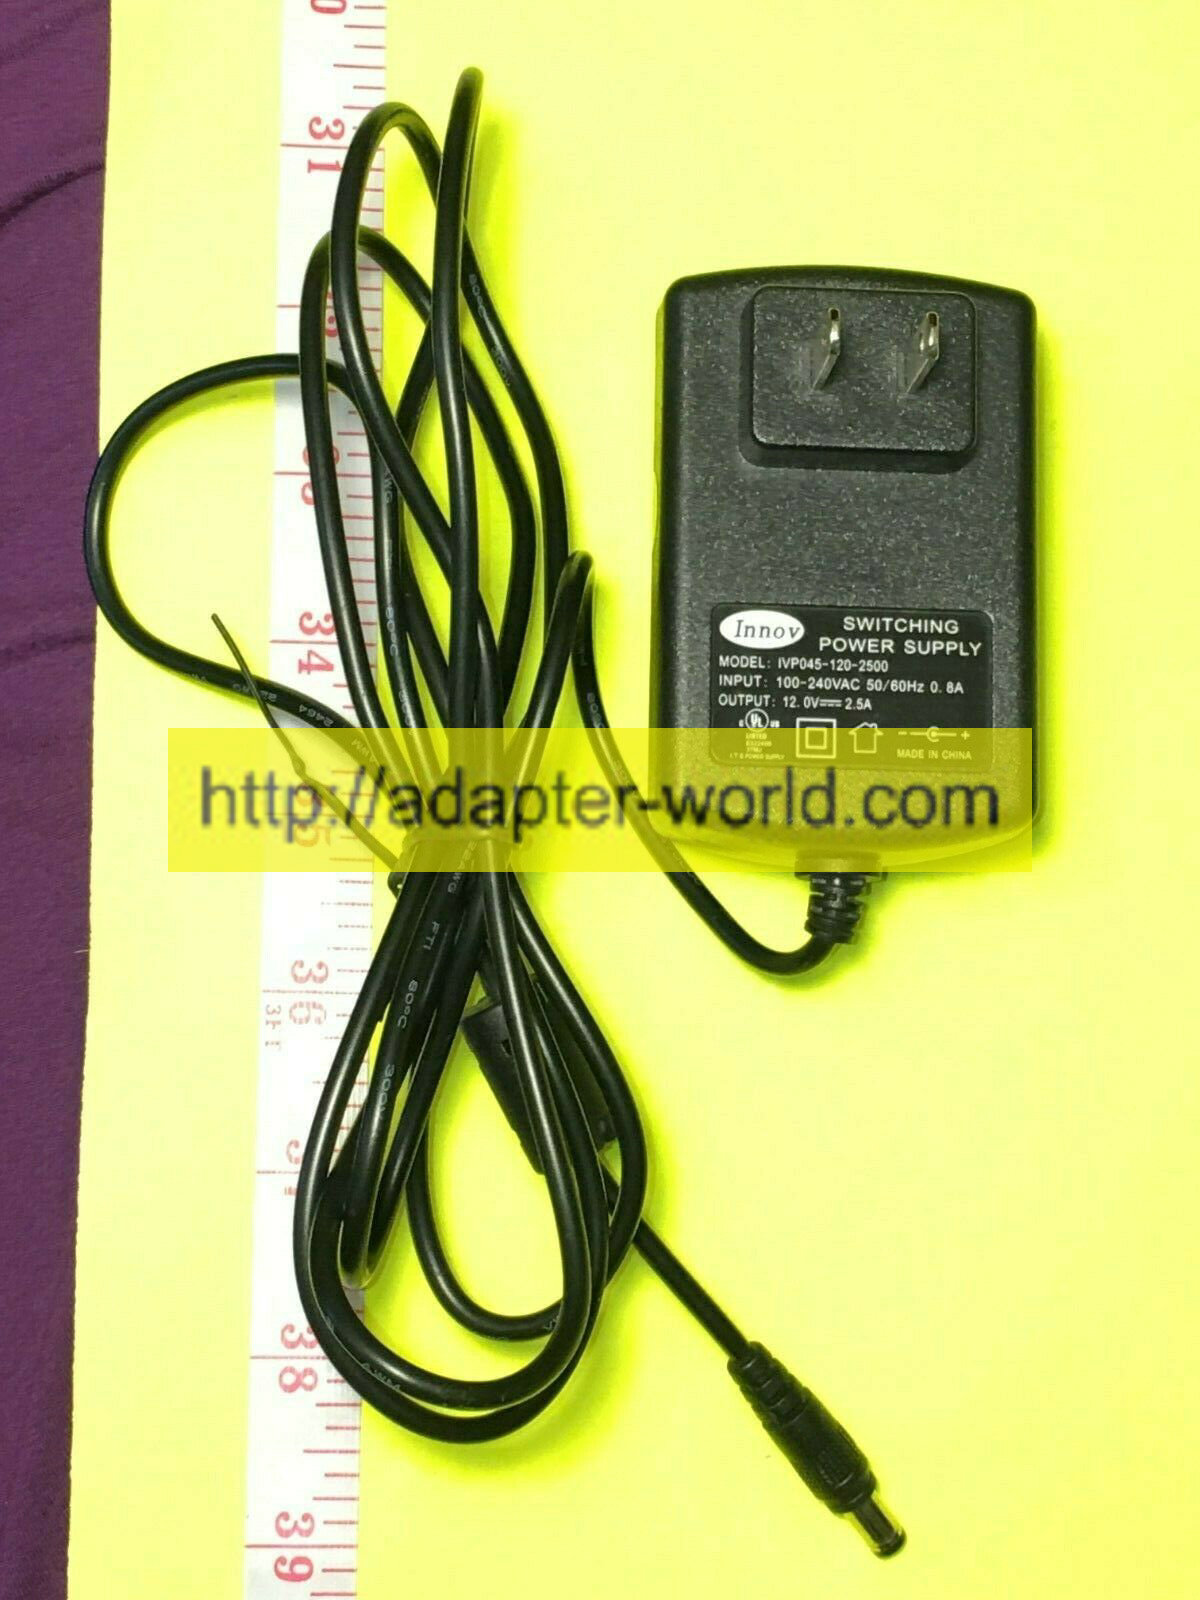 *100% Brand NEW 12.0V DC 2.5A INNOV Cable Source CS Model ivp045-120-2500 Charger Power Supply